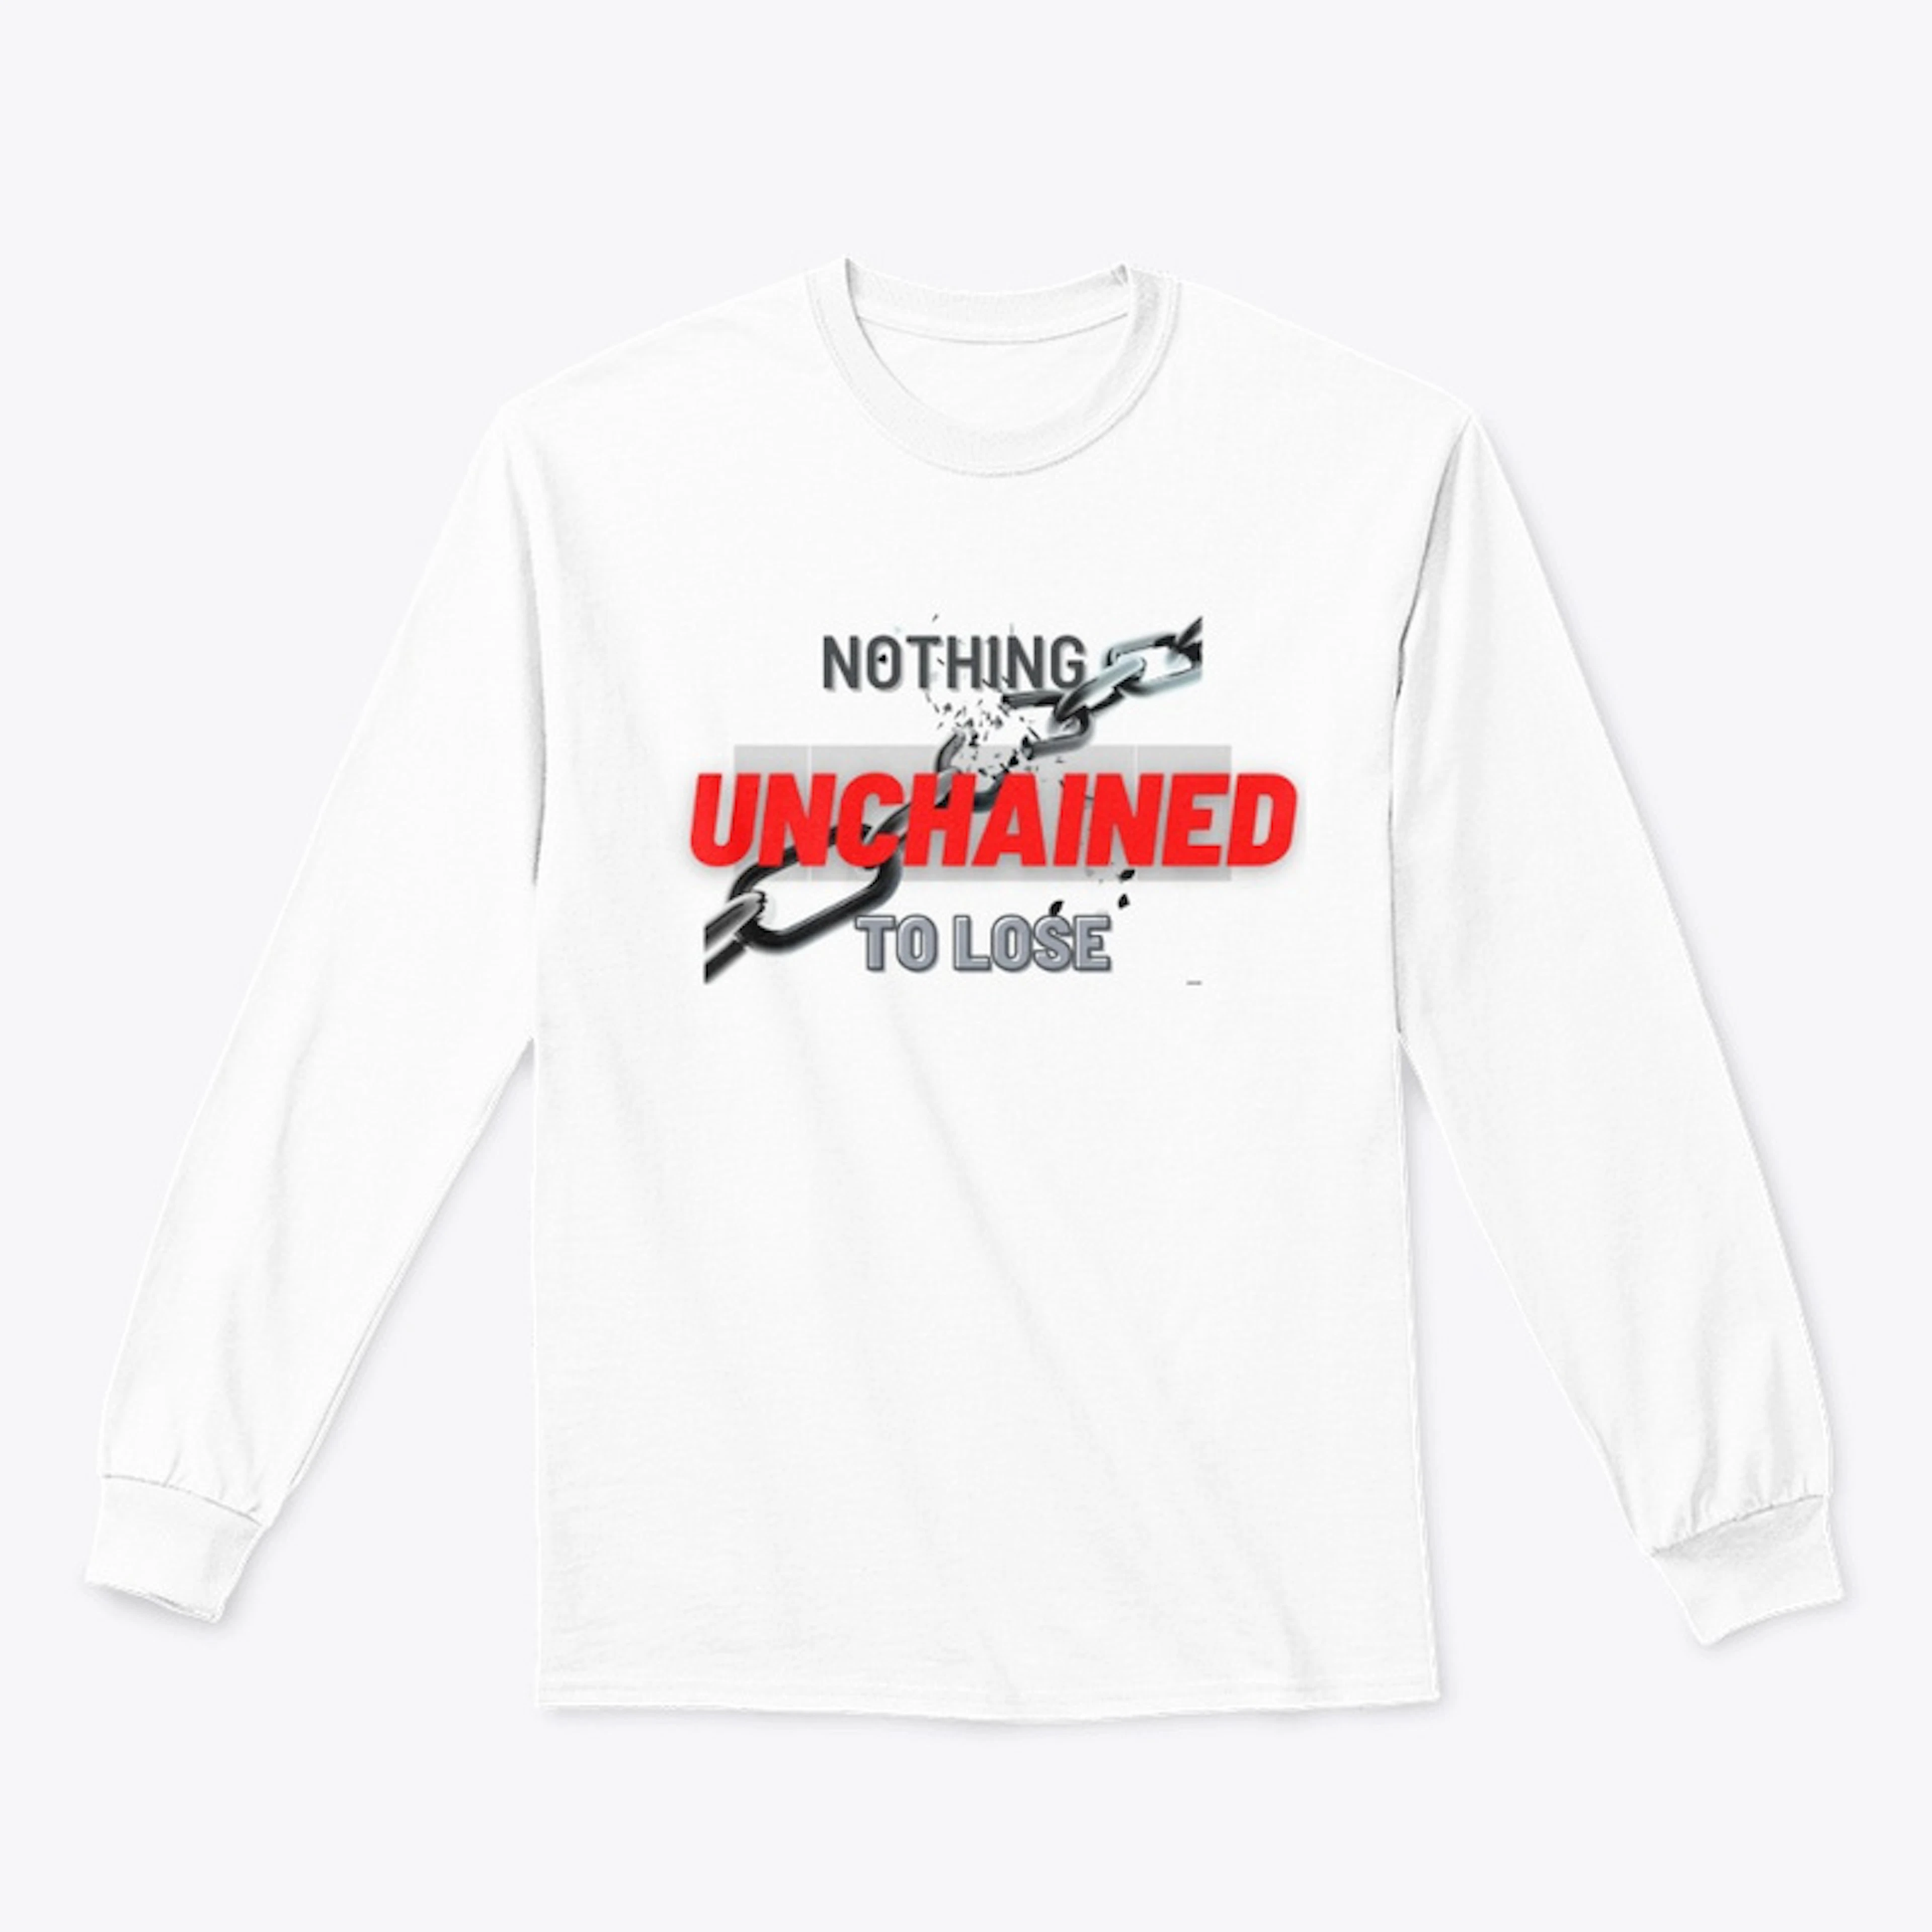 N2L Unchained White